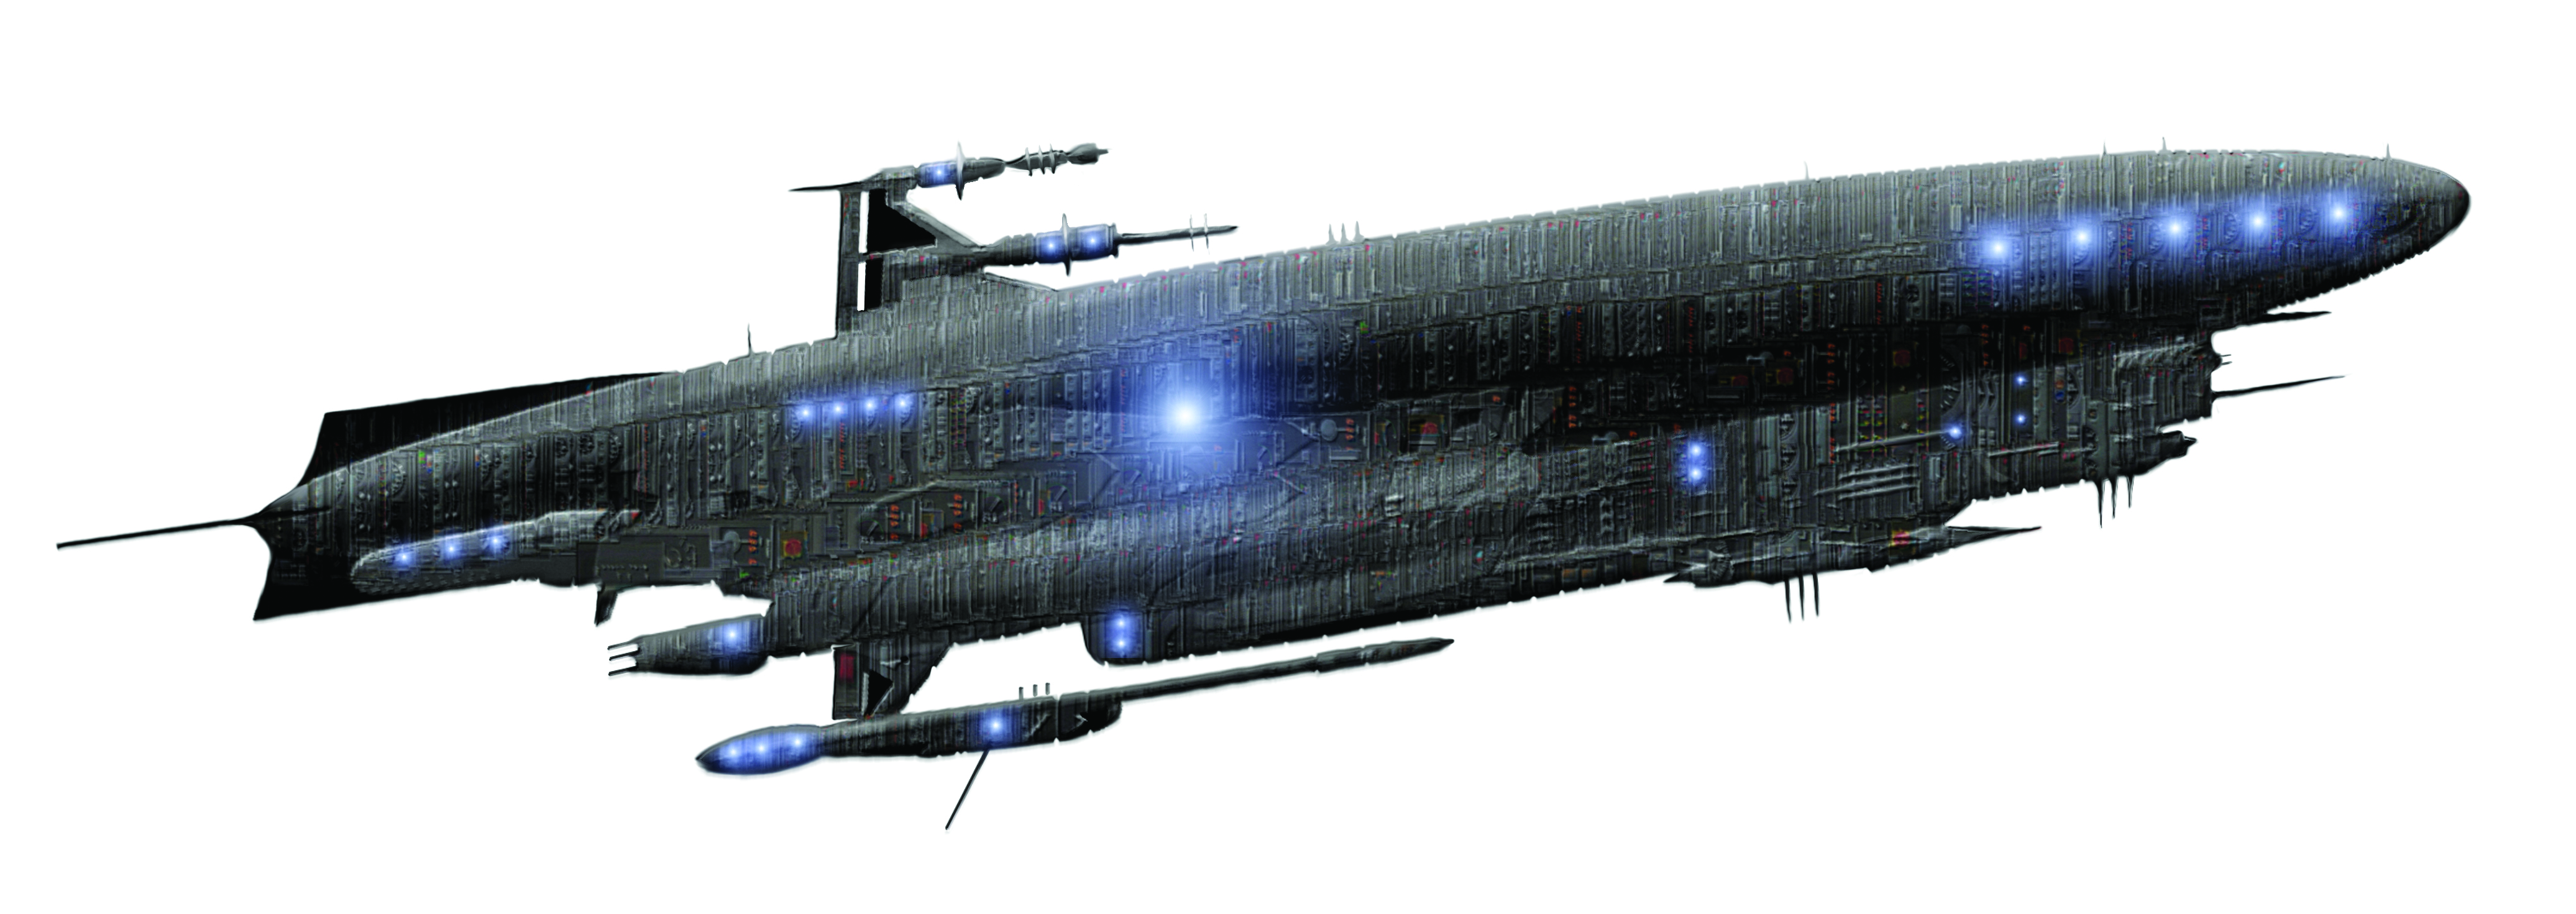 . Hdpng.com 2.15%, /images/spaceship.jpg - Space Ship, Transparent background PNG HD thumbnail